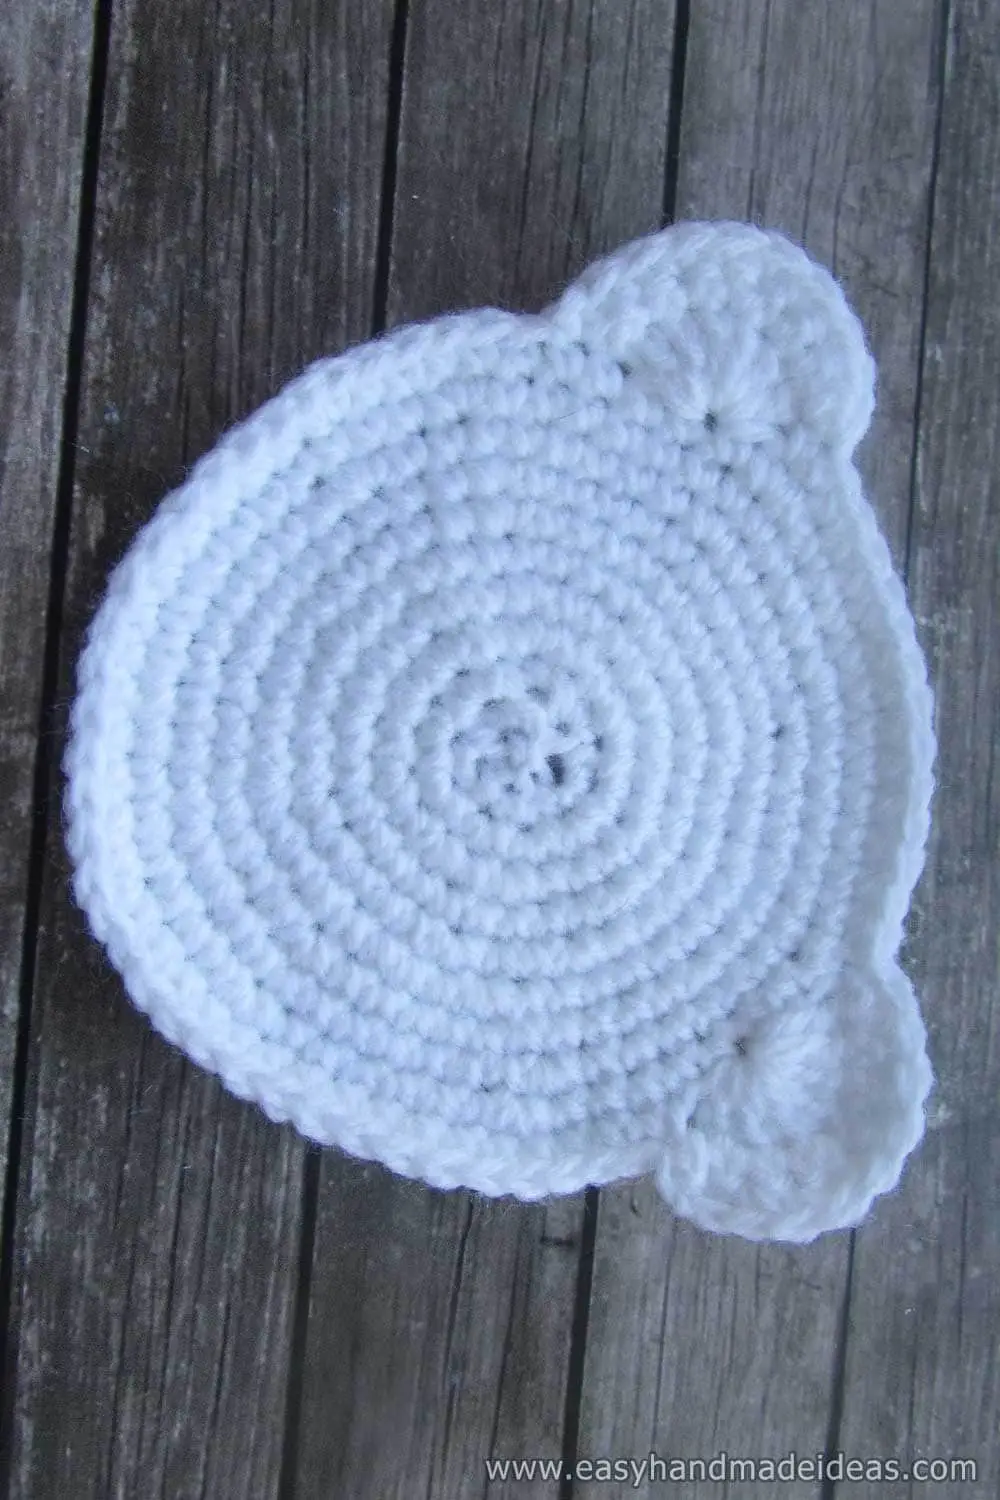 Crocheting the Second Ear